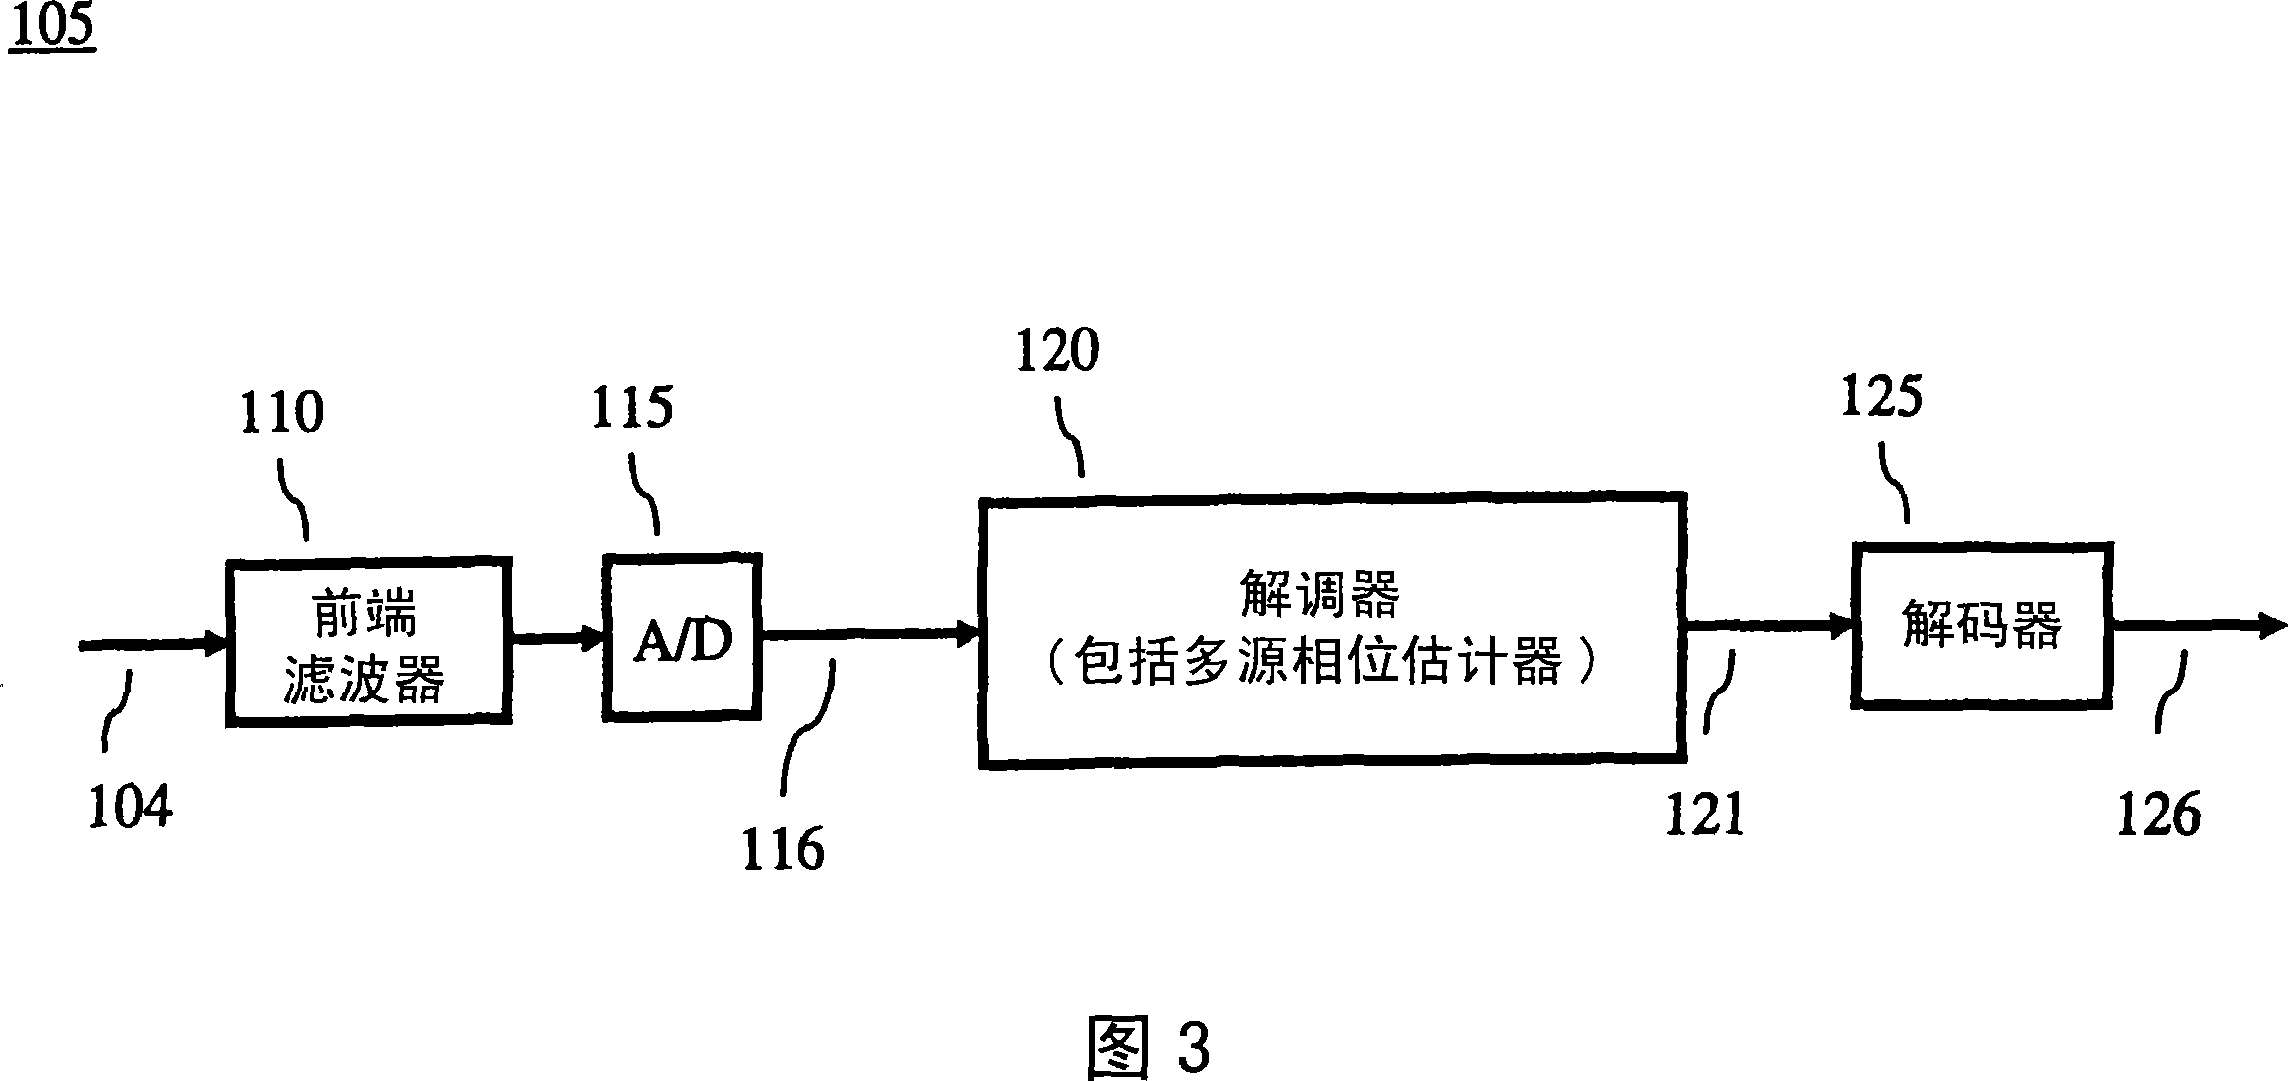 Method and device for carrier recovery using multiple sources